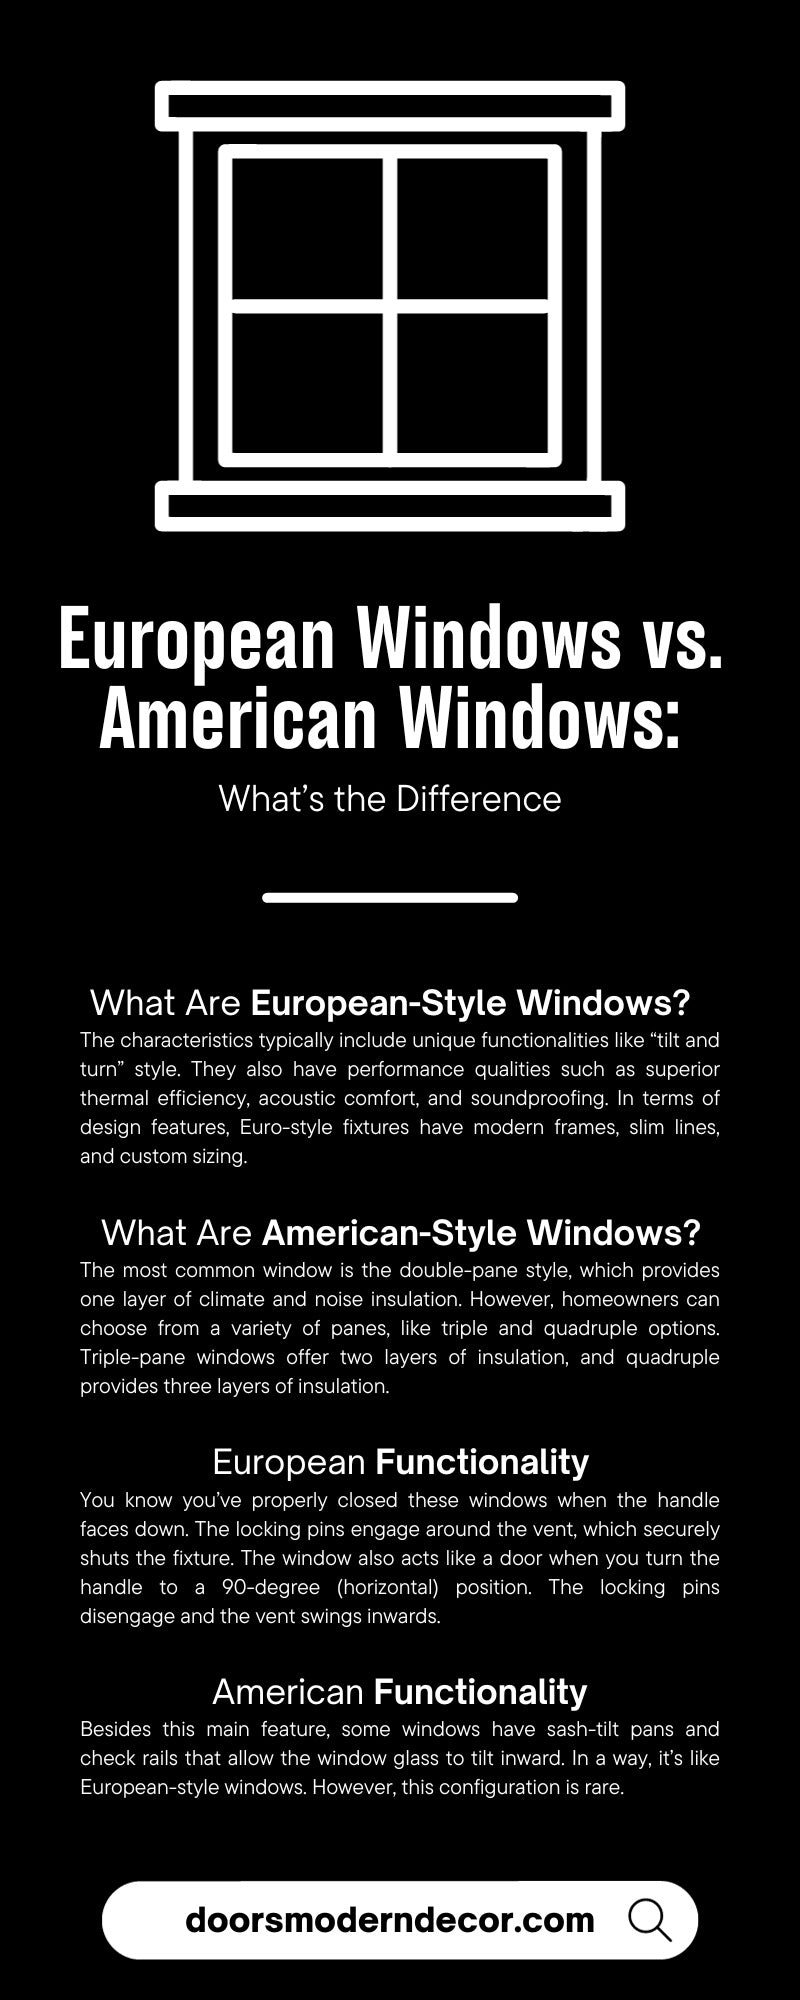 European Windows vs. American Windows: What’s the Difference